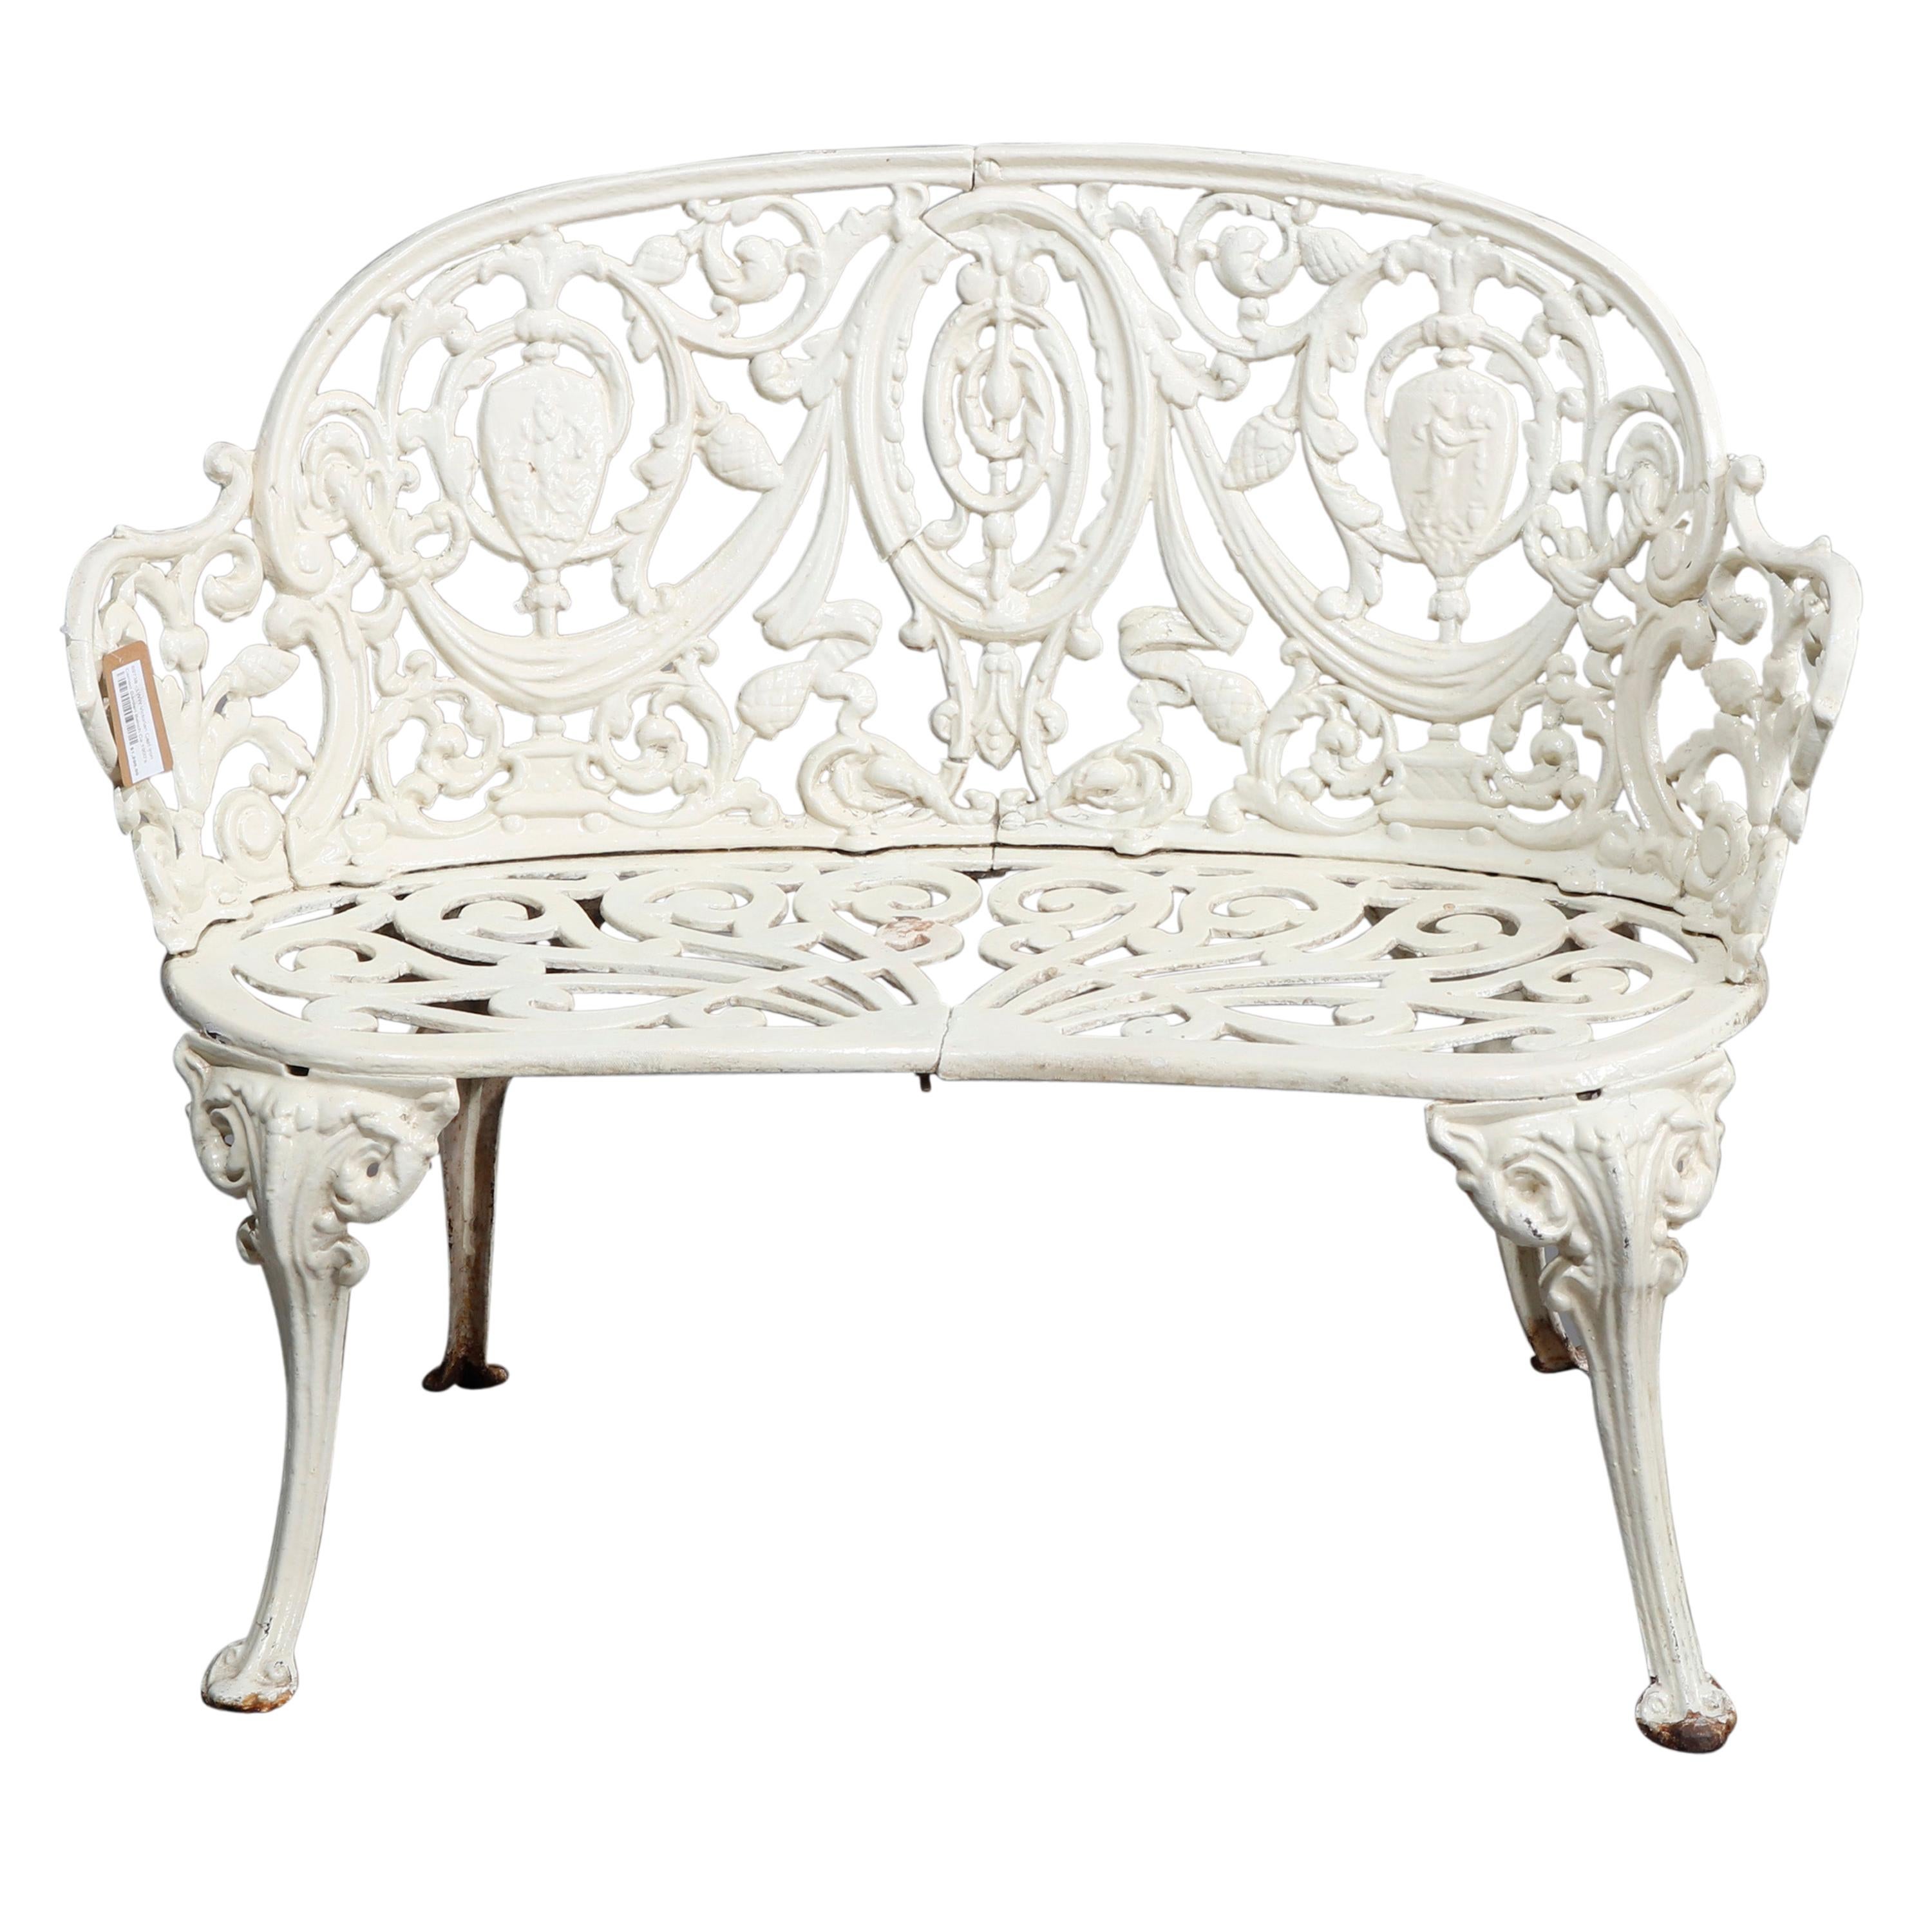 Antique French Victorian White Painted Cast Iron Cameo Garden Bench, circa 1890